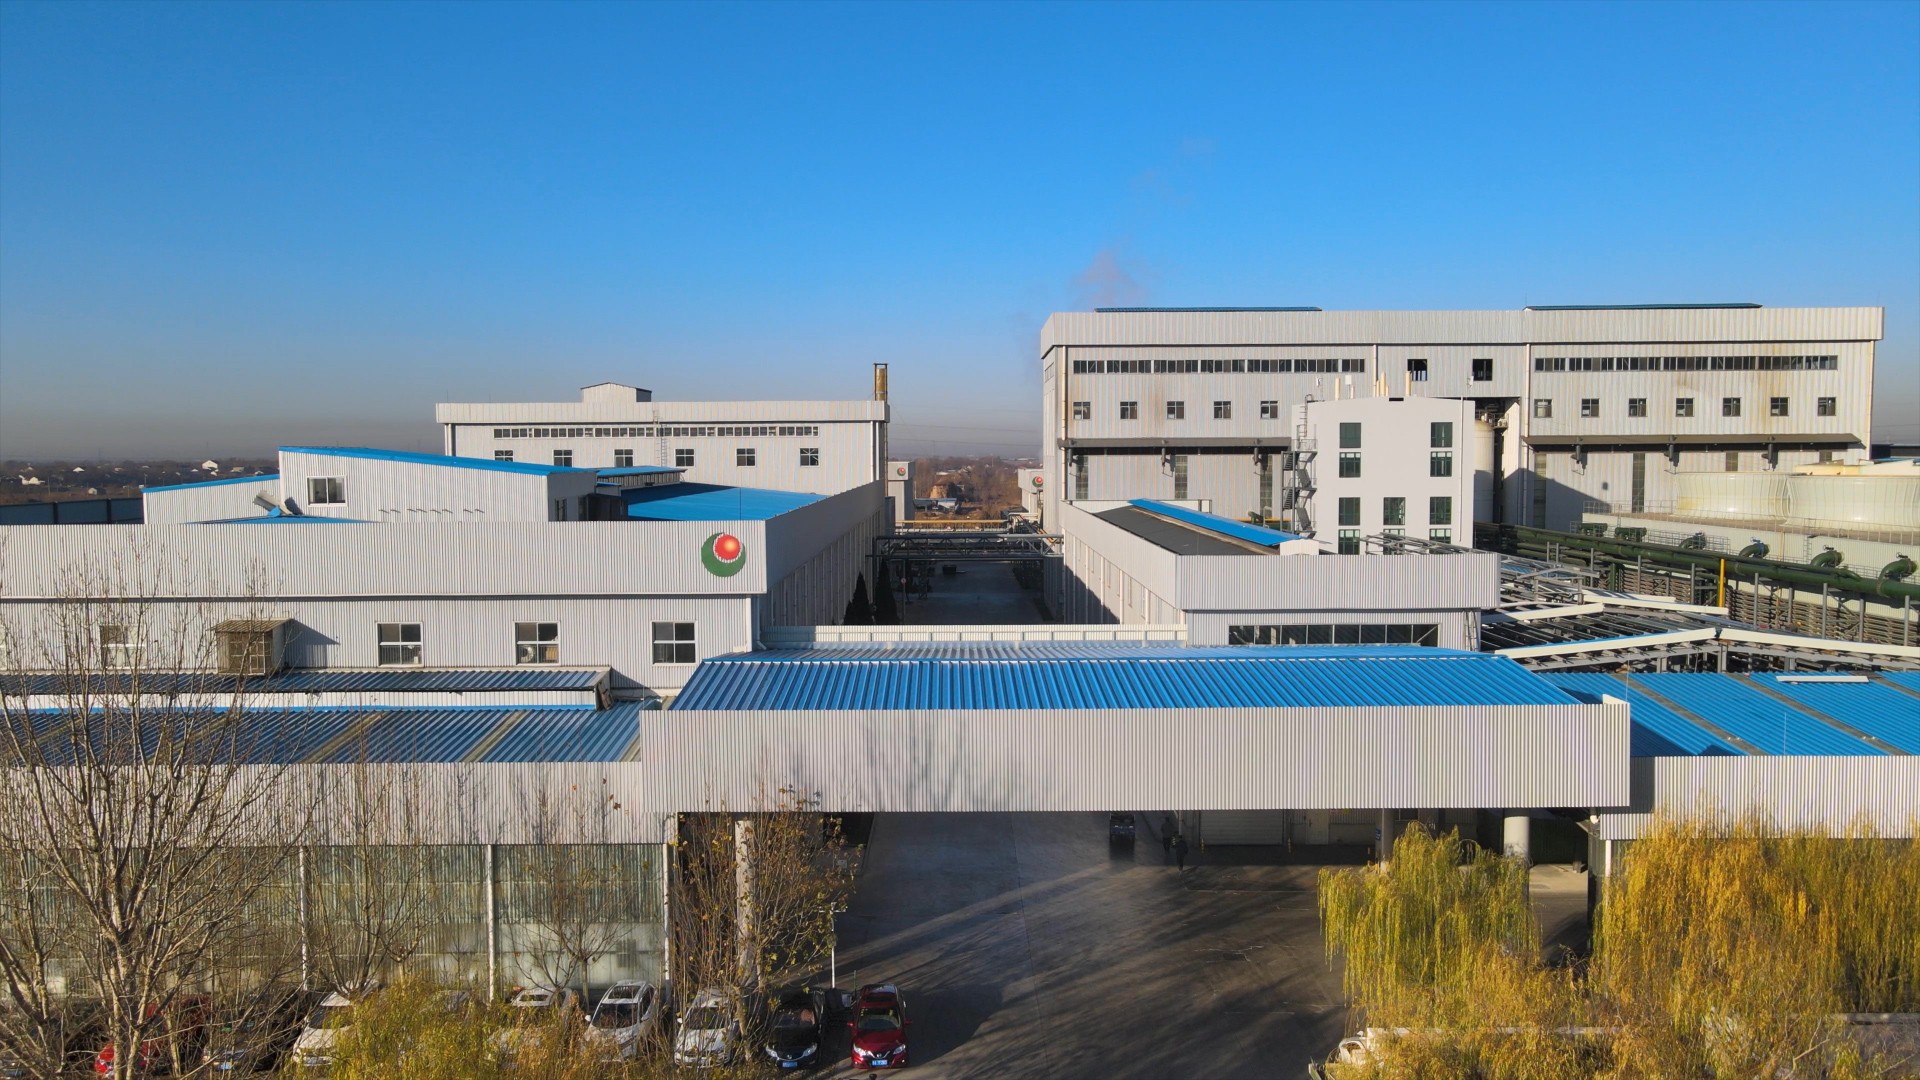 Shandong Sanyuan Biology location in Binzhou Industrial Park, Shandong Province